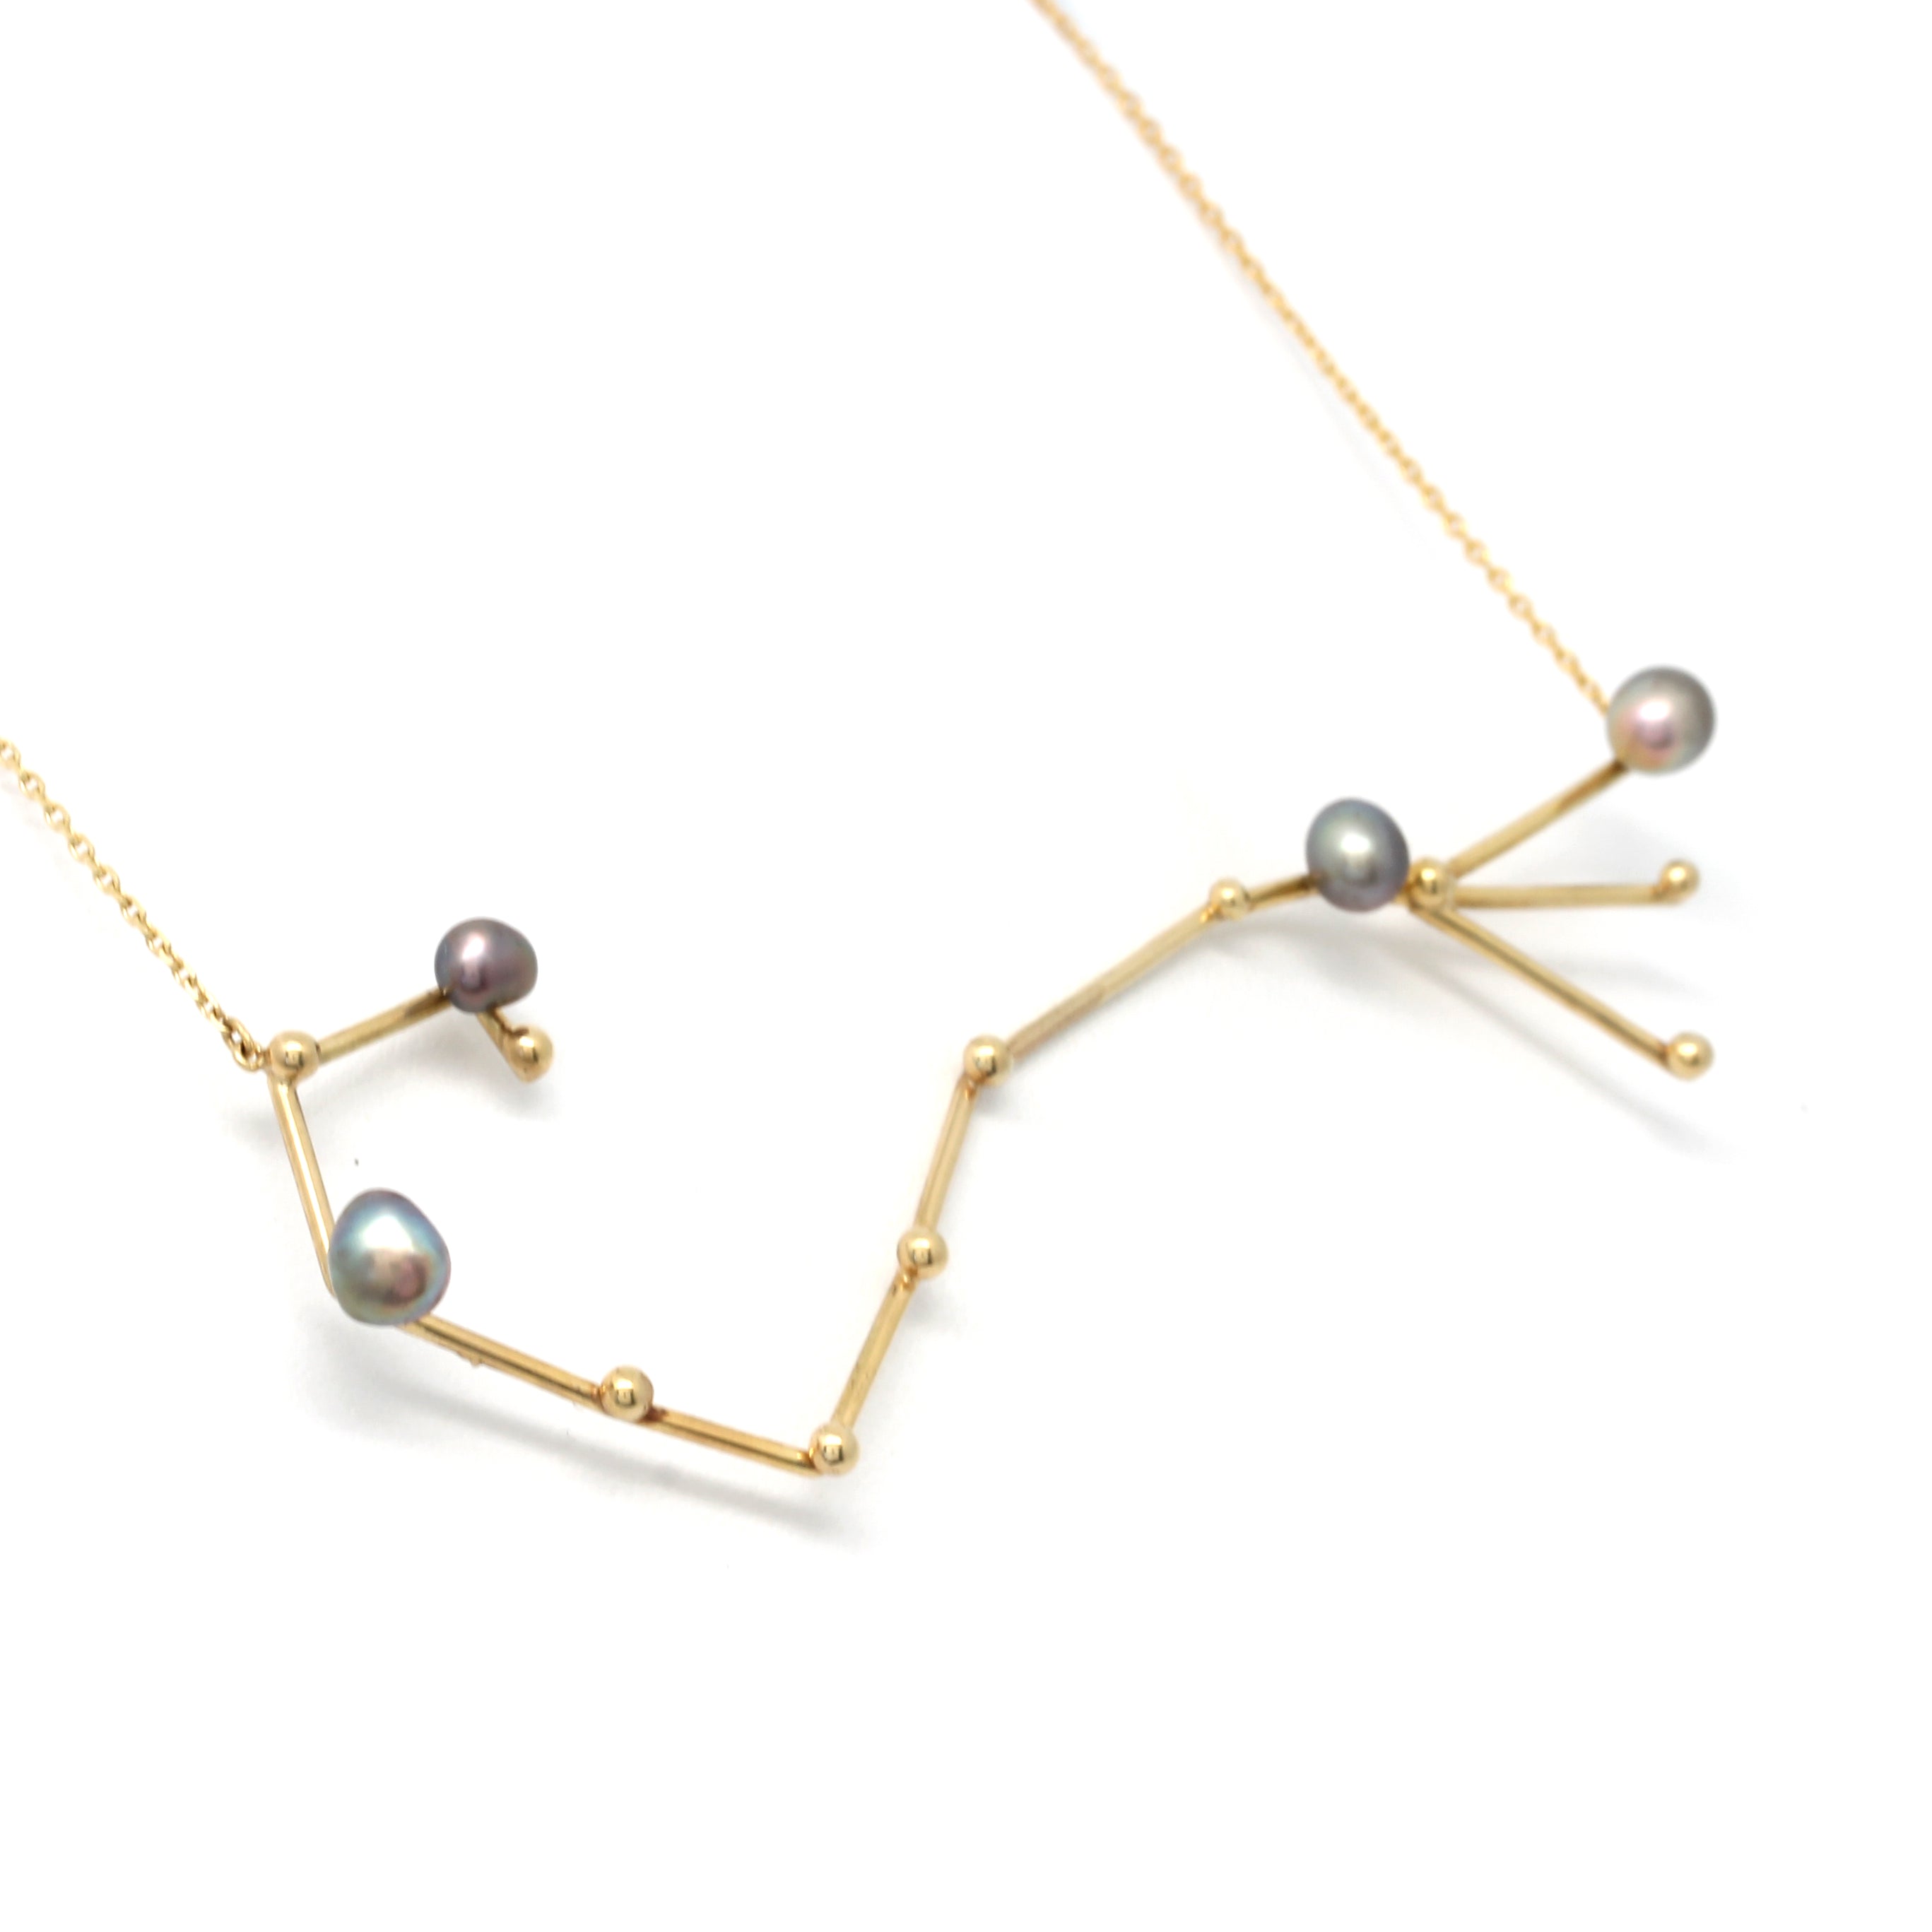 "Scorpius (Oct 23th - Nov 21st)" 14K Yellow Gold Pendant and Chain with Cortez Keshi Pearls